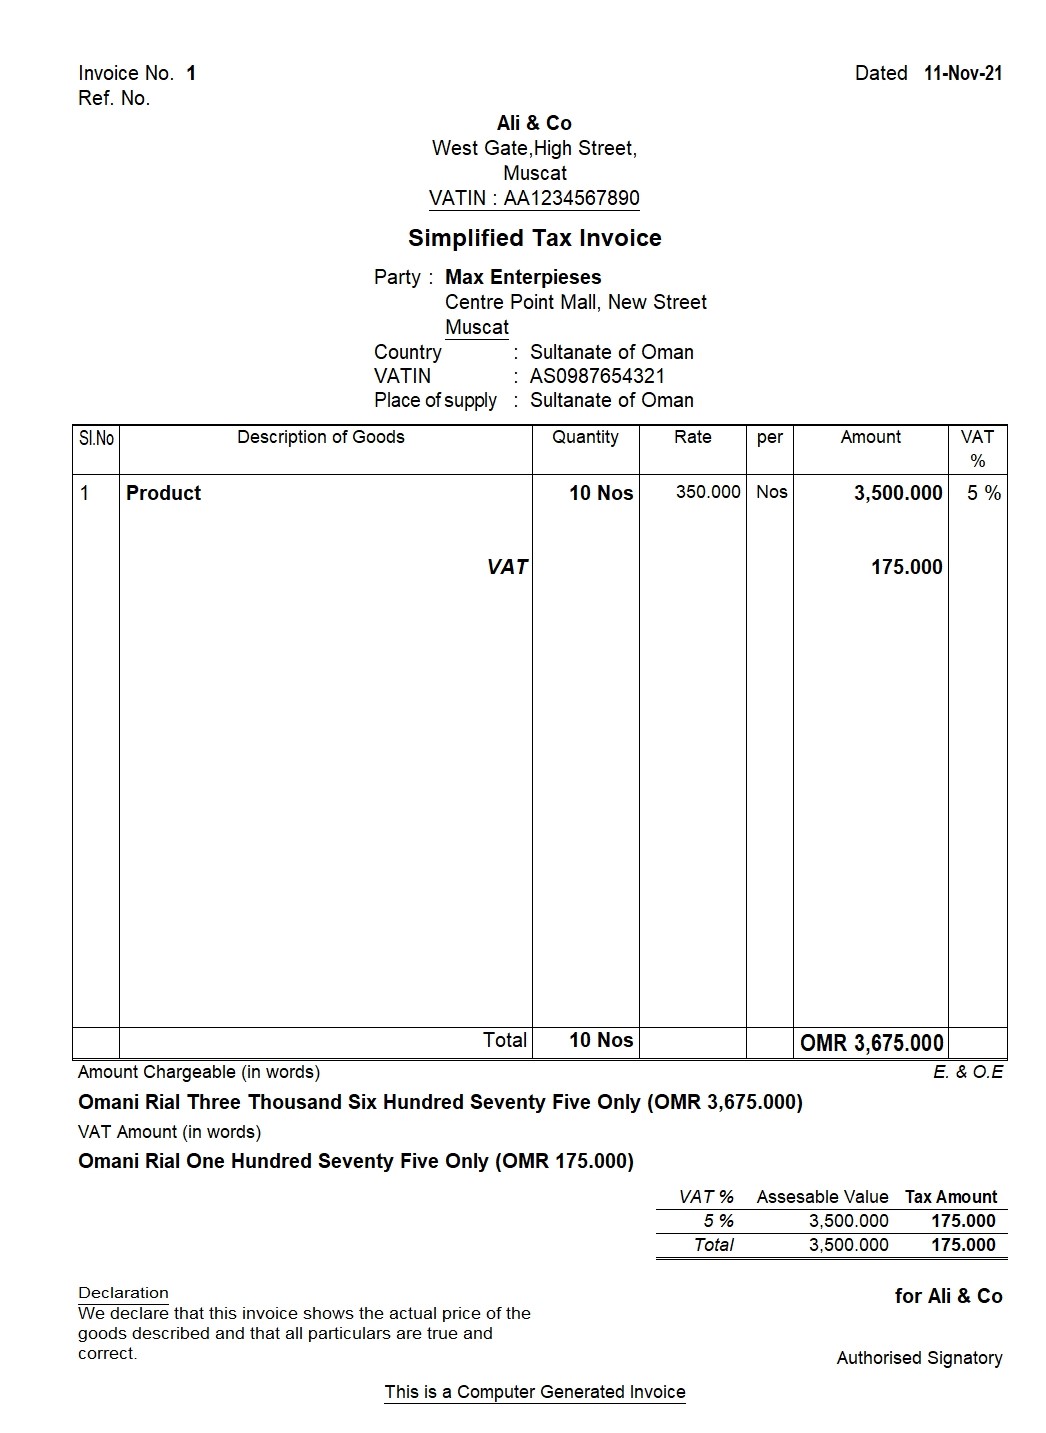 simplified tax invoice in oman